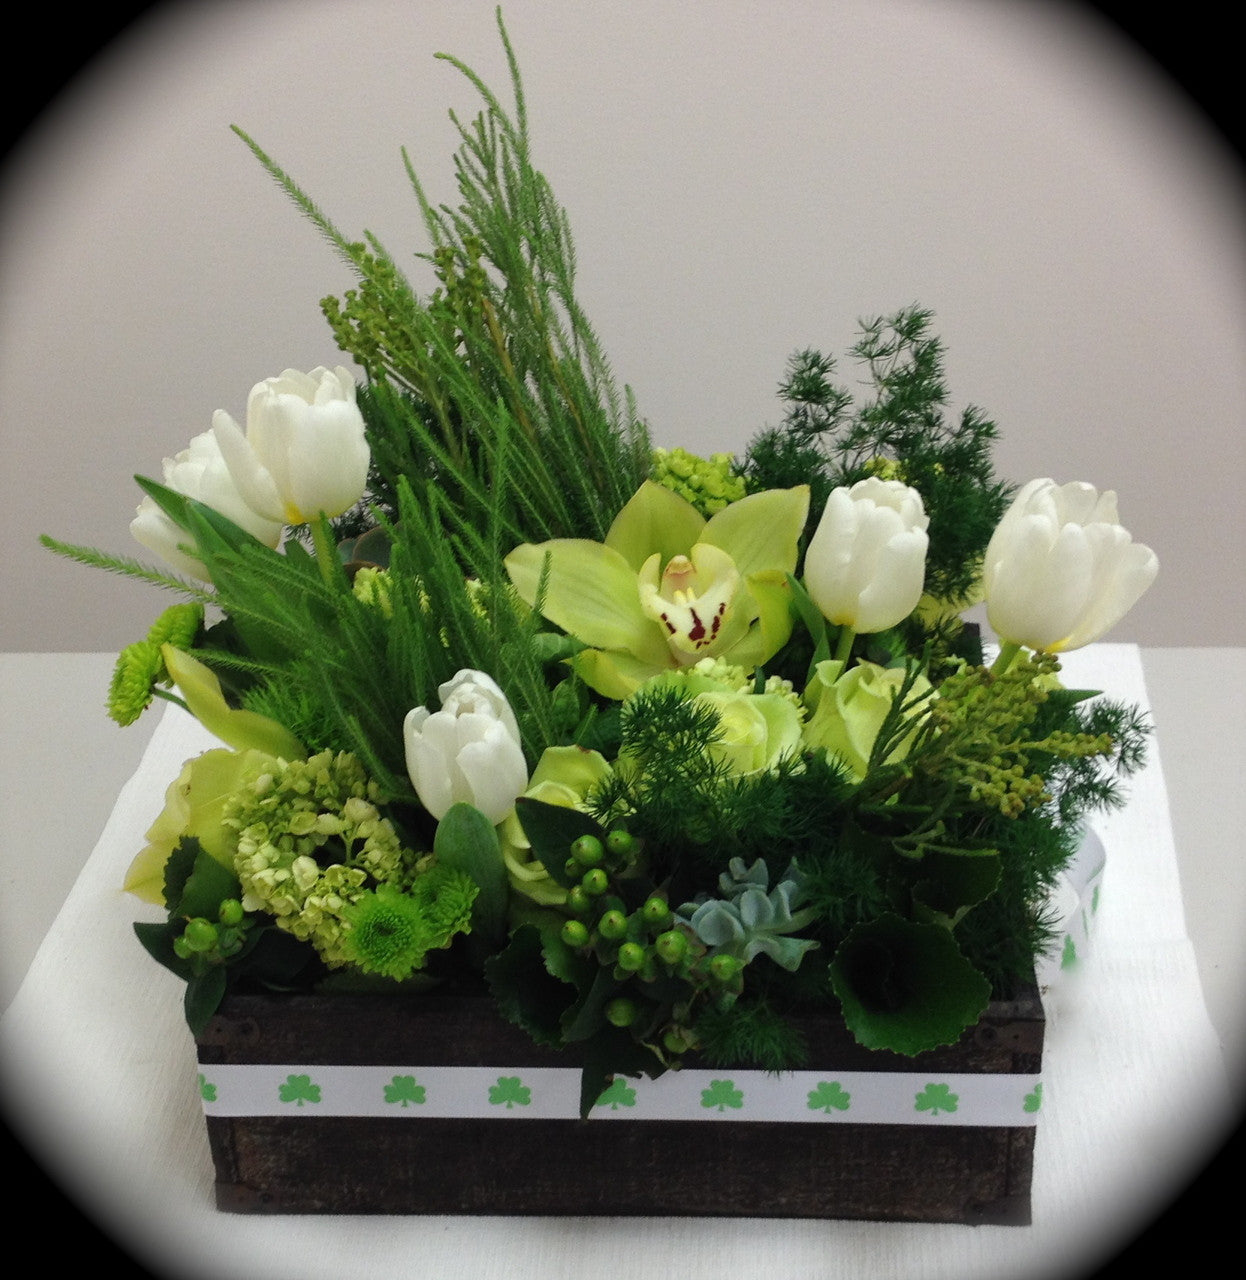 Our shamrocks add just the right touch to this green and white floral arrangement to make it a special delivery for St. Patricks Day!